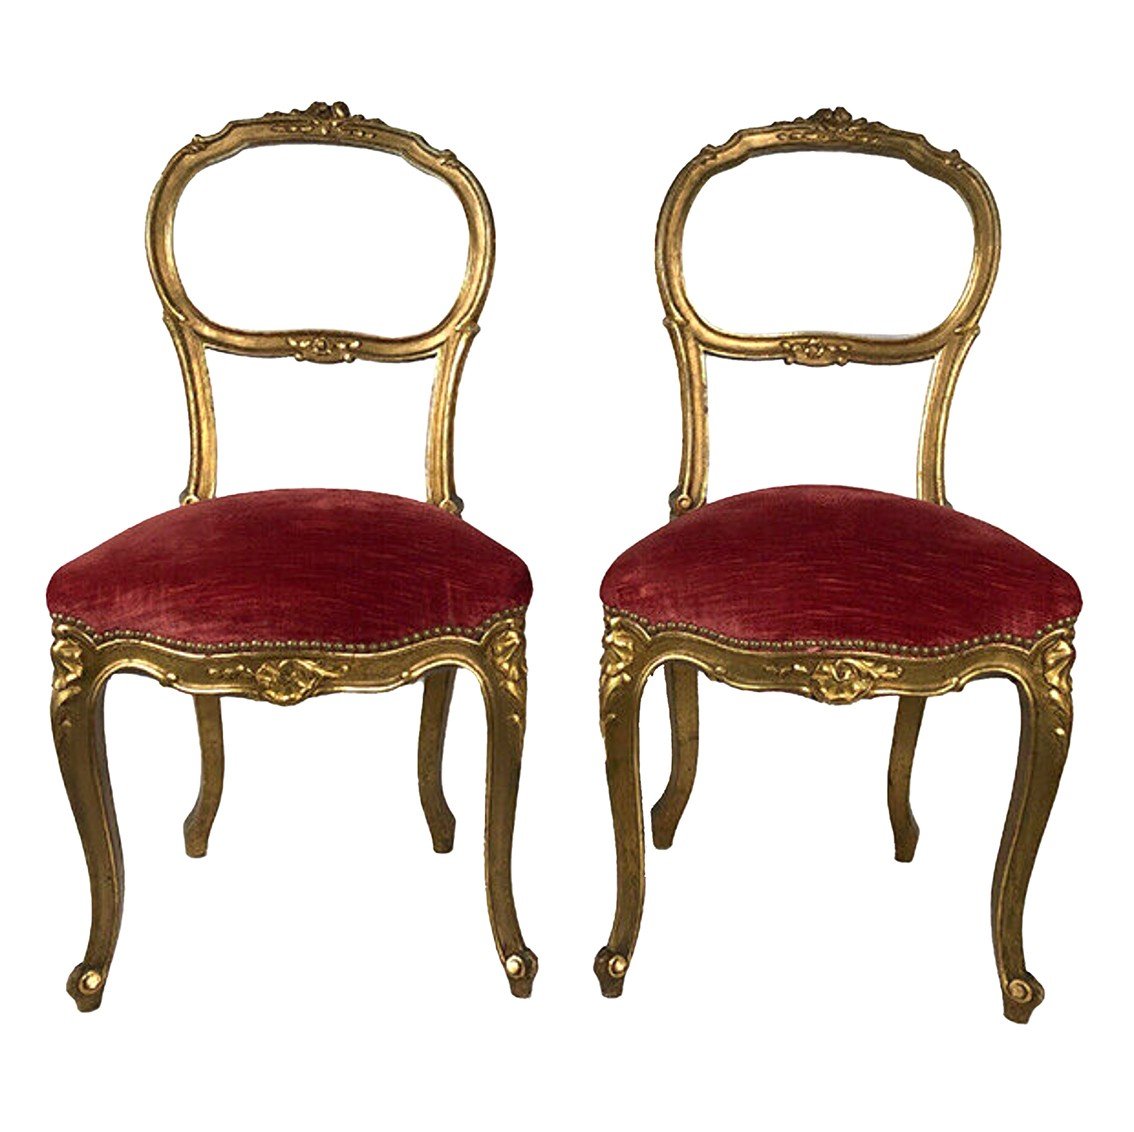 Pair Of Louis XV Style Chairs In Golden Wood, Napoleon III Period